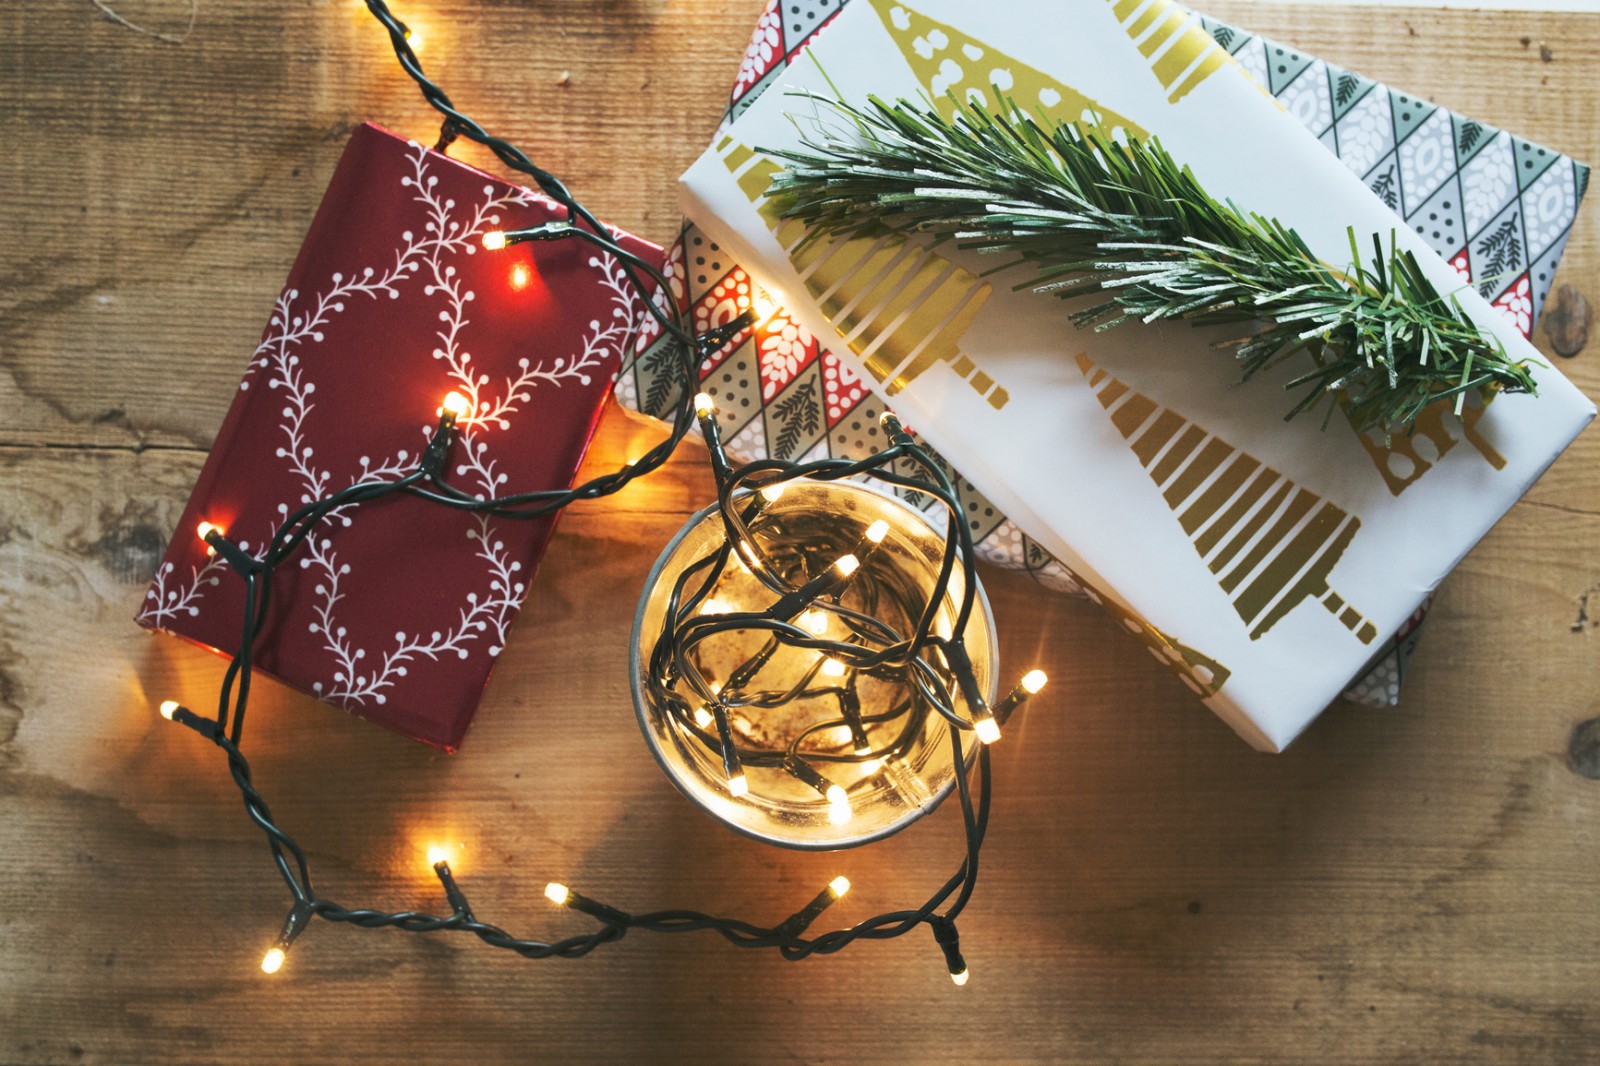 75 Holiday Email Subject Lines to Light Up Inboxes This Christmas Season